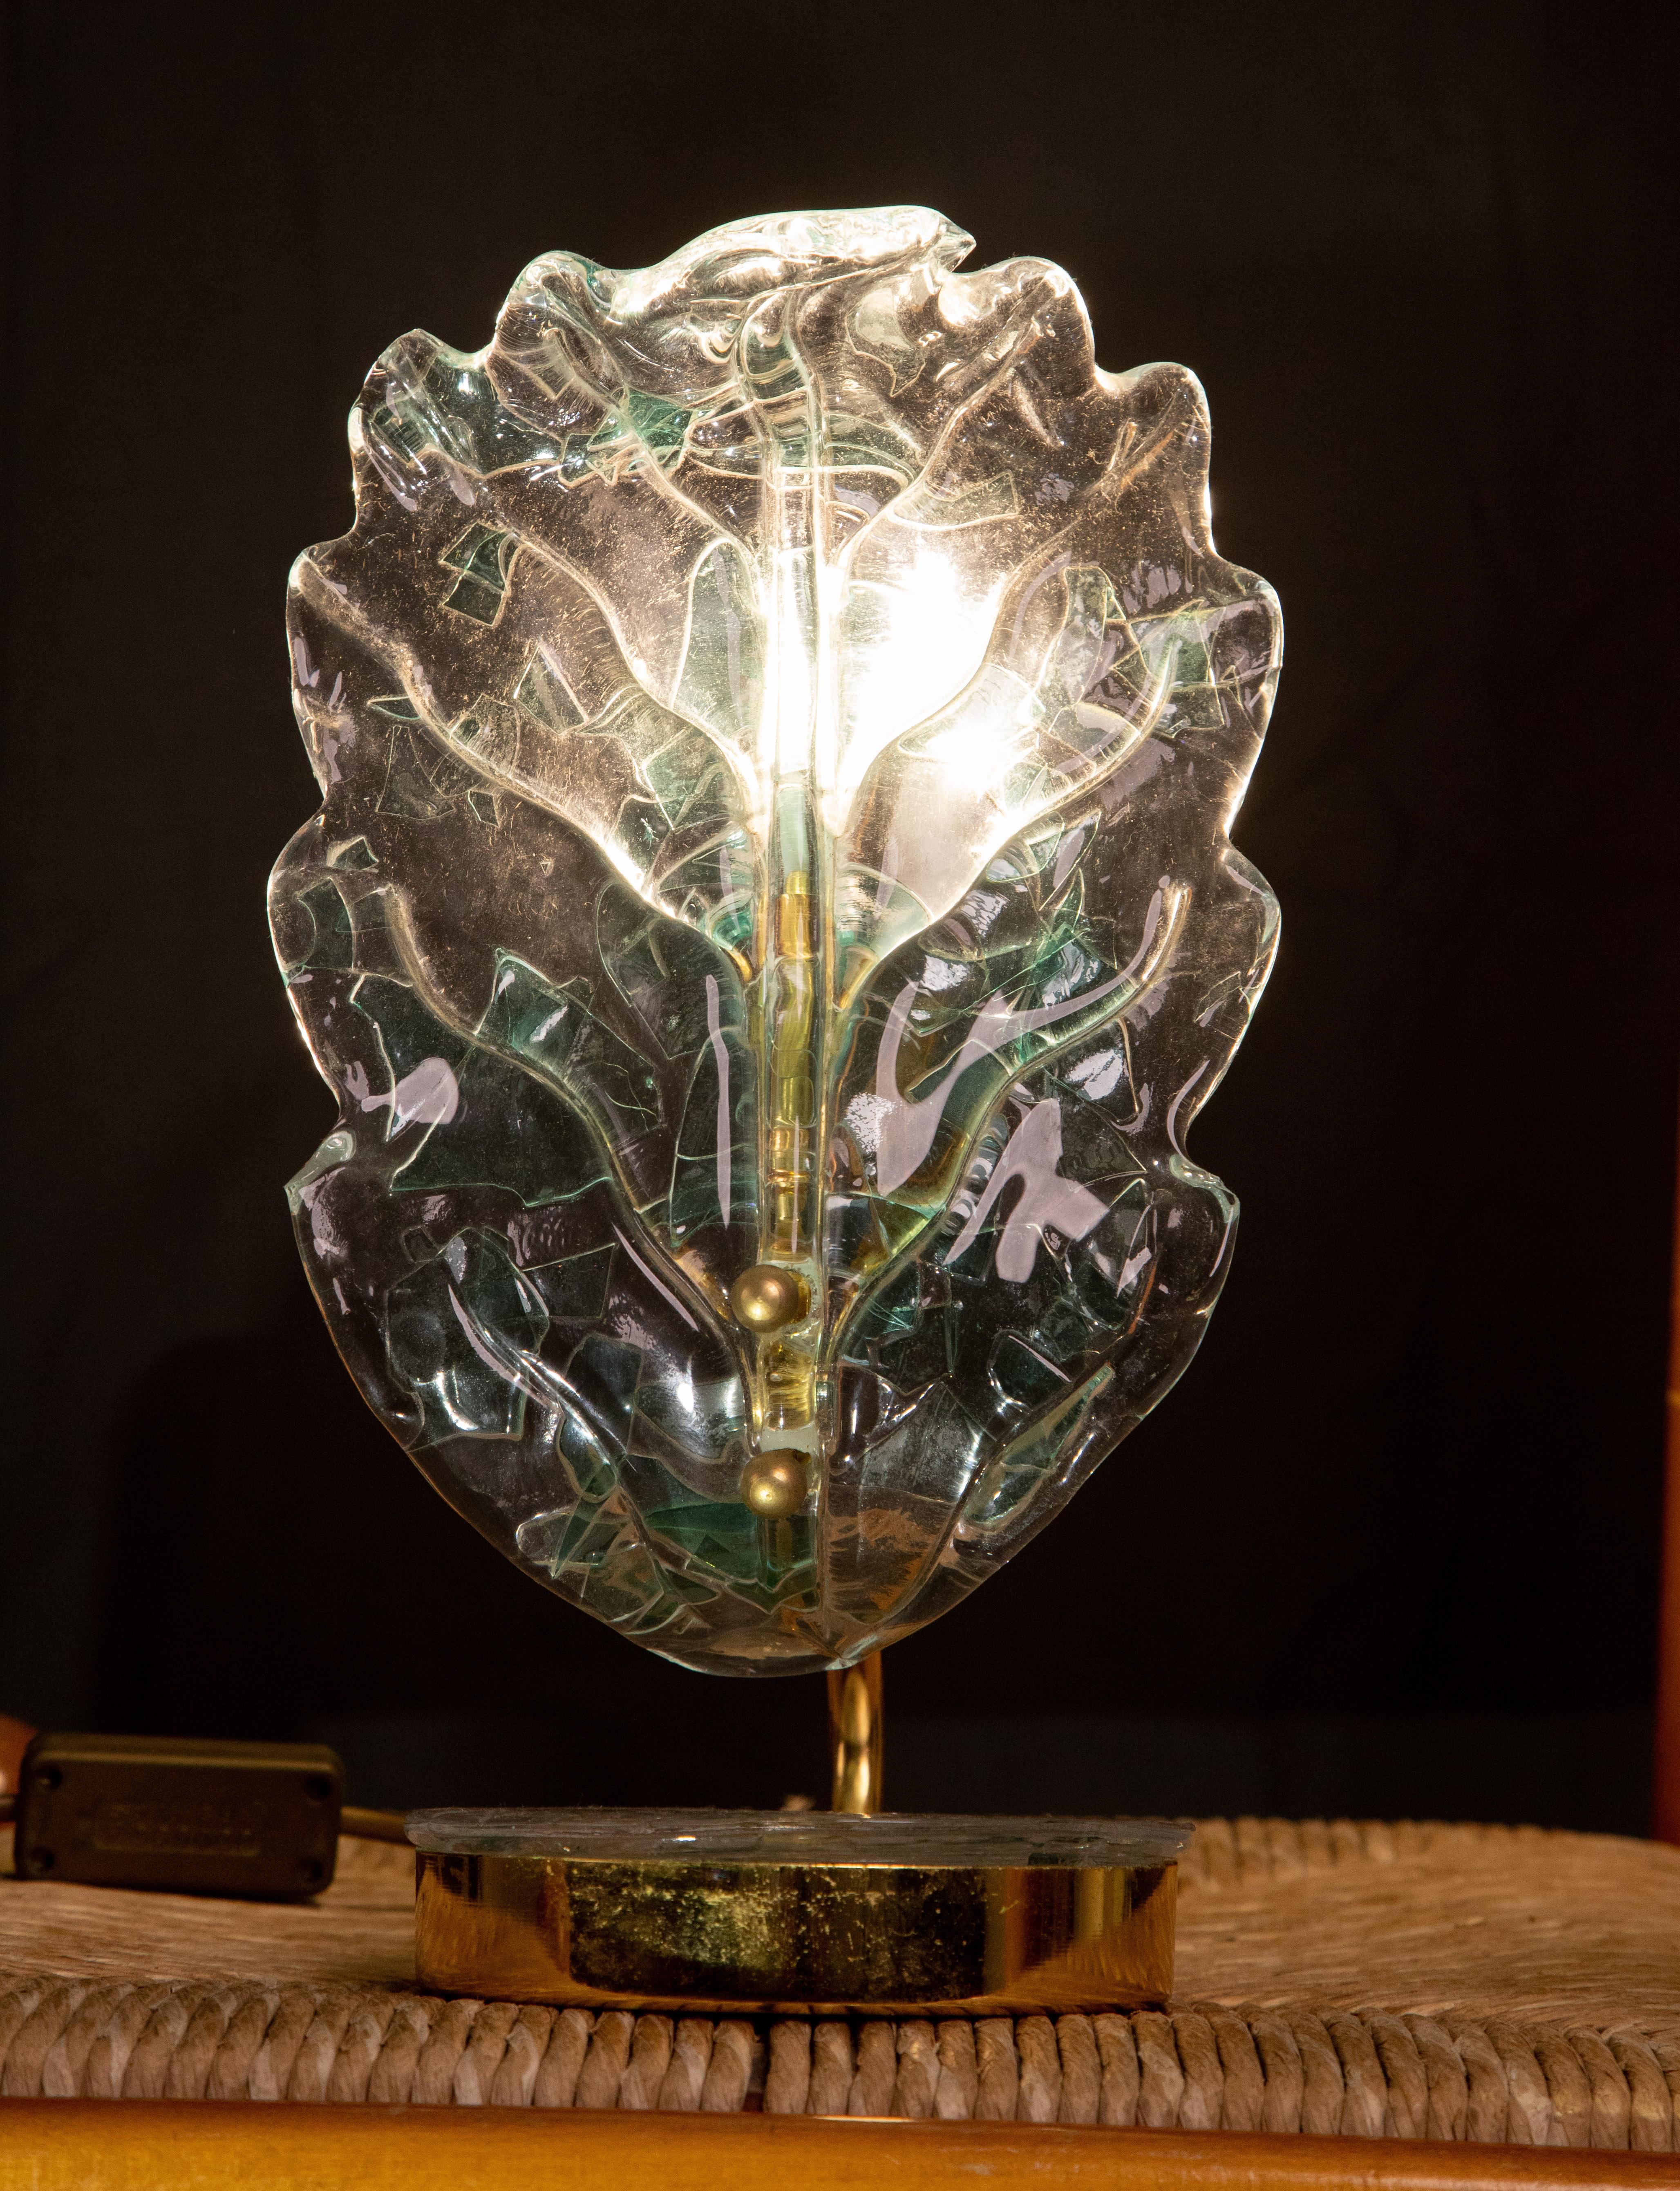 Beautiful Murano glass table lamp in blue color with transparent shades.
Also works with LED bulbs. 
Exquisite details of the Murano glass shade with iridescent colors.
Due to the workmanship of the glass, the light spreads softly and diffusely.